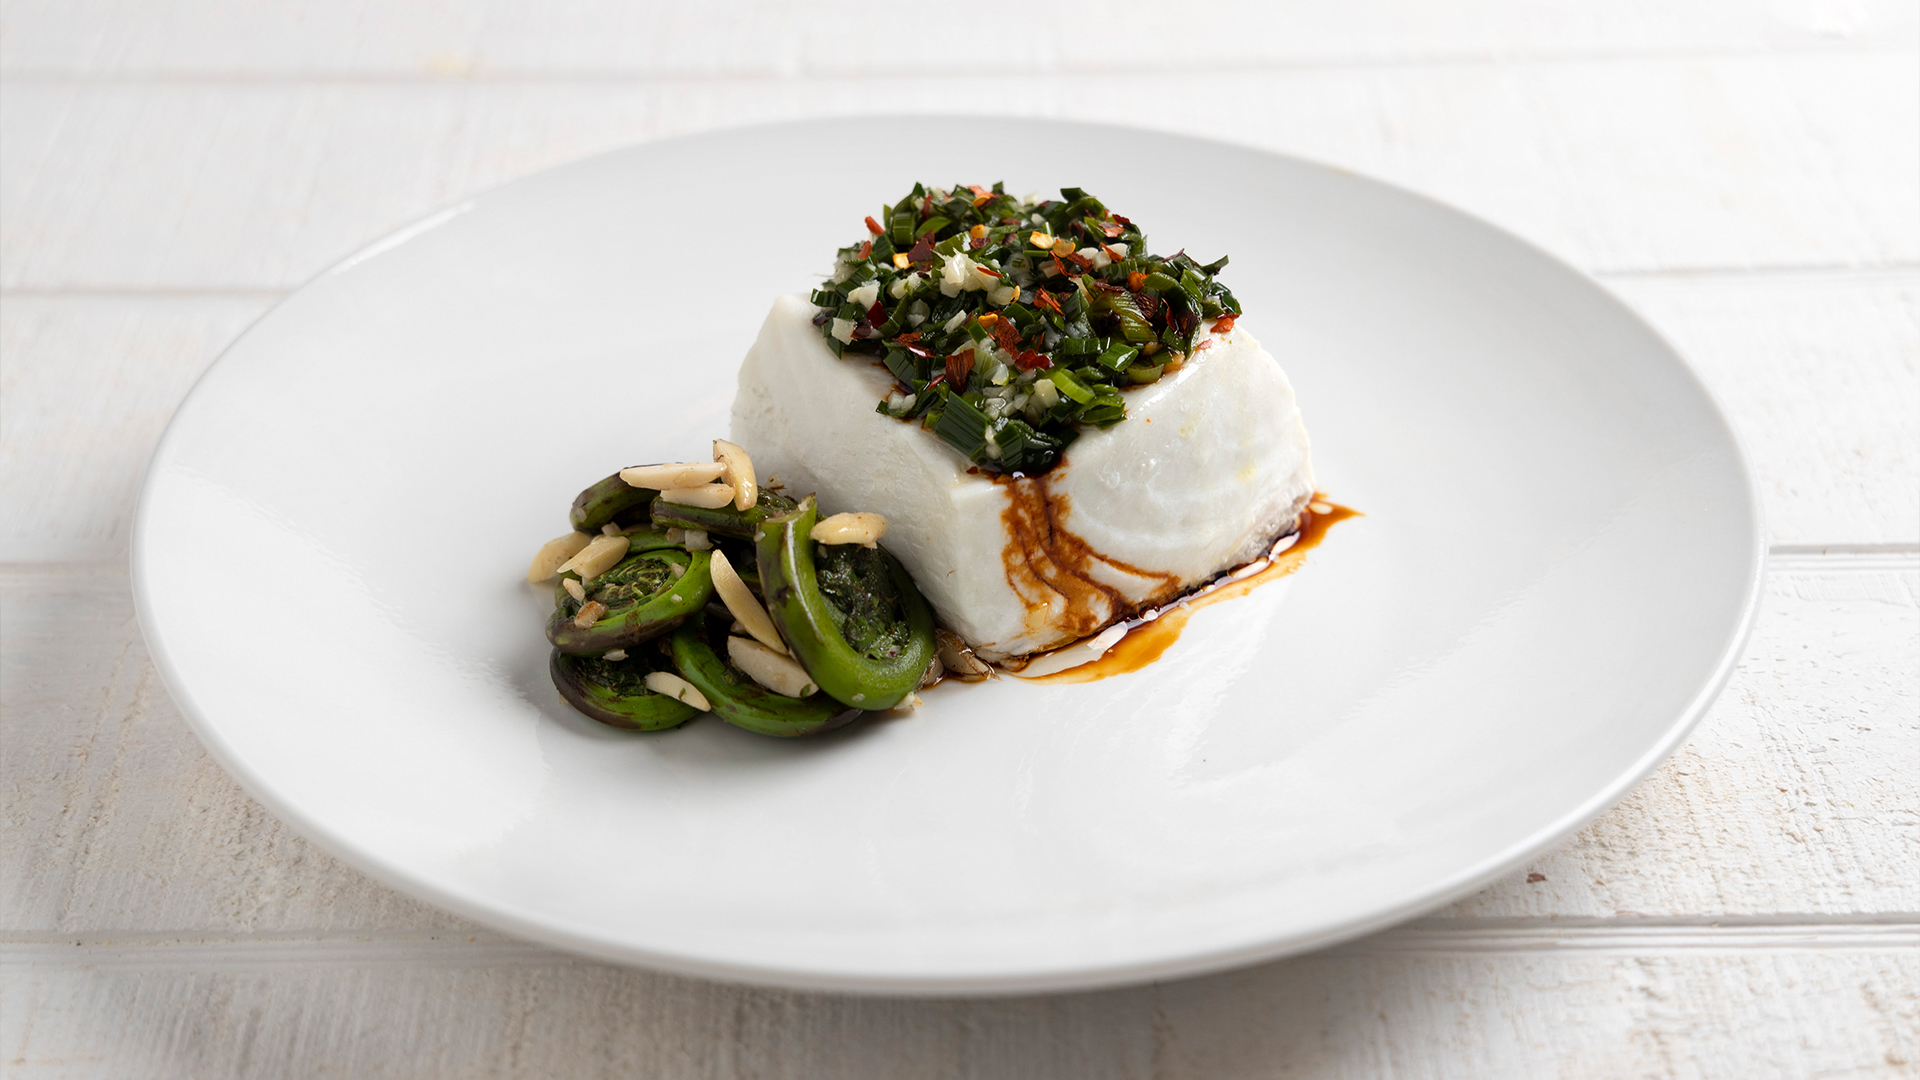 Steamed halibut with ramps and fiddleheads